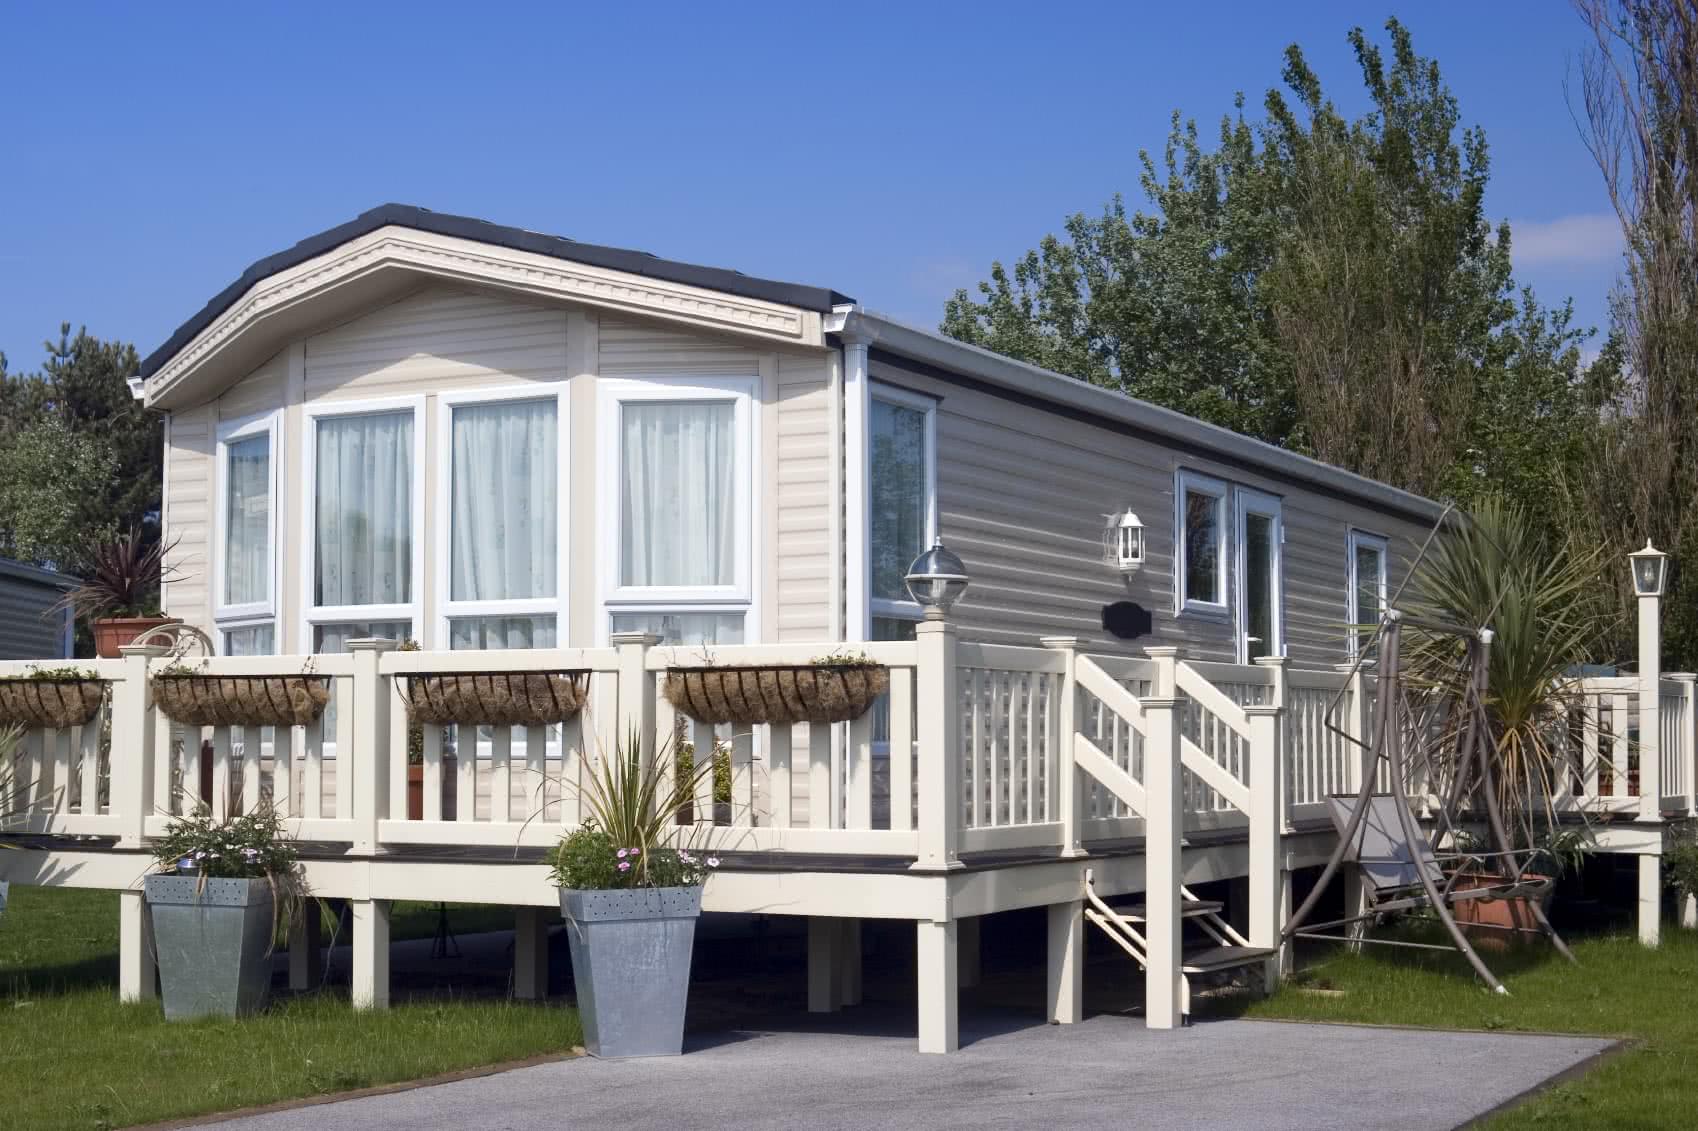 An Essential Guide to Mobile Home Insurance